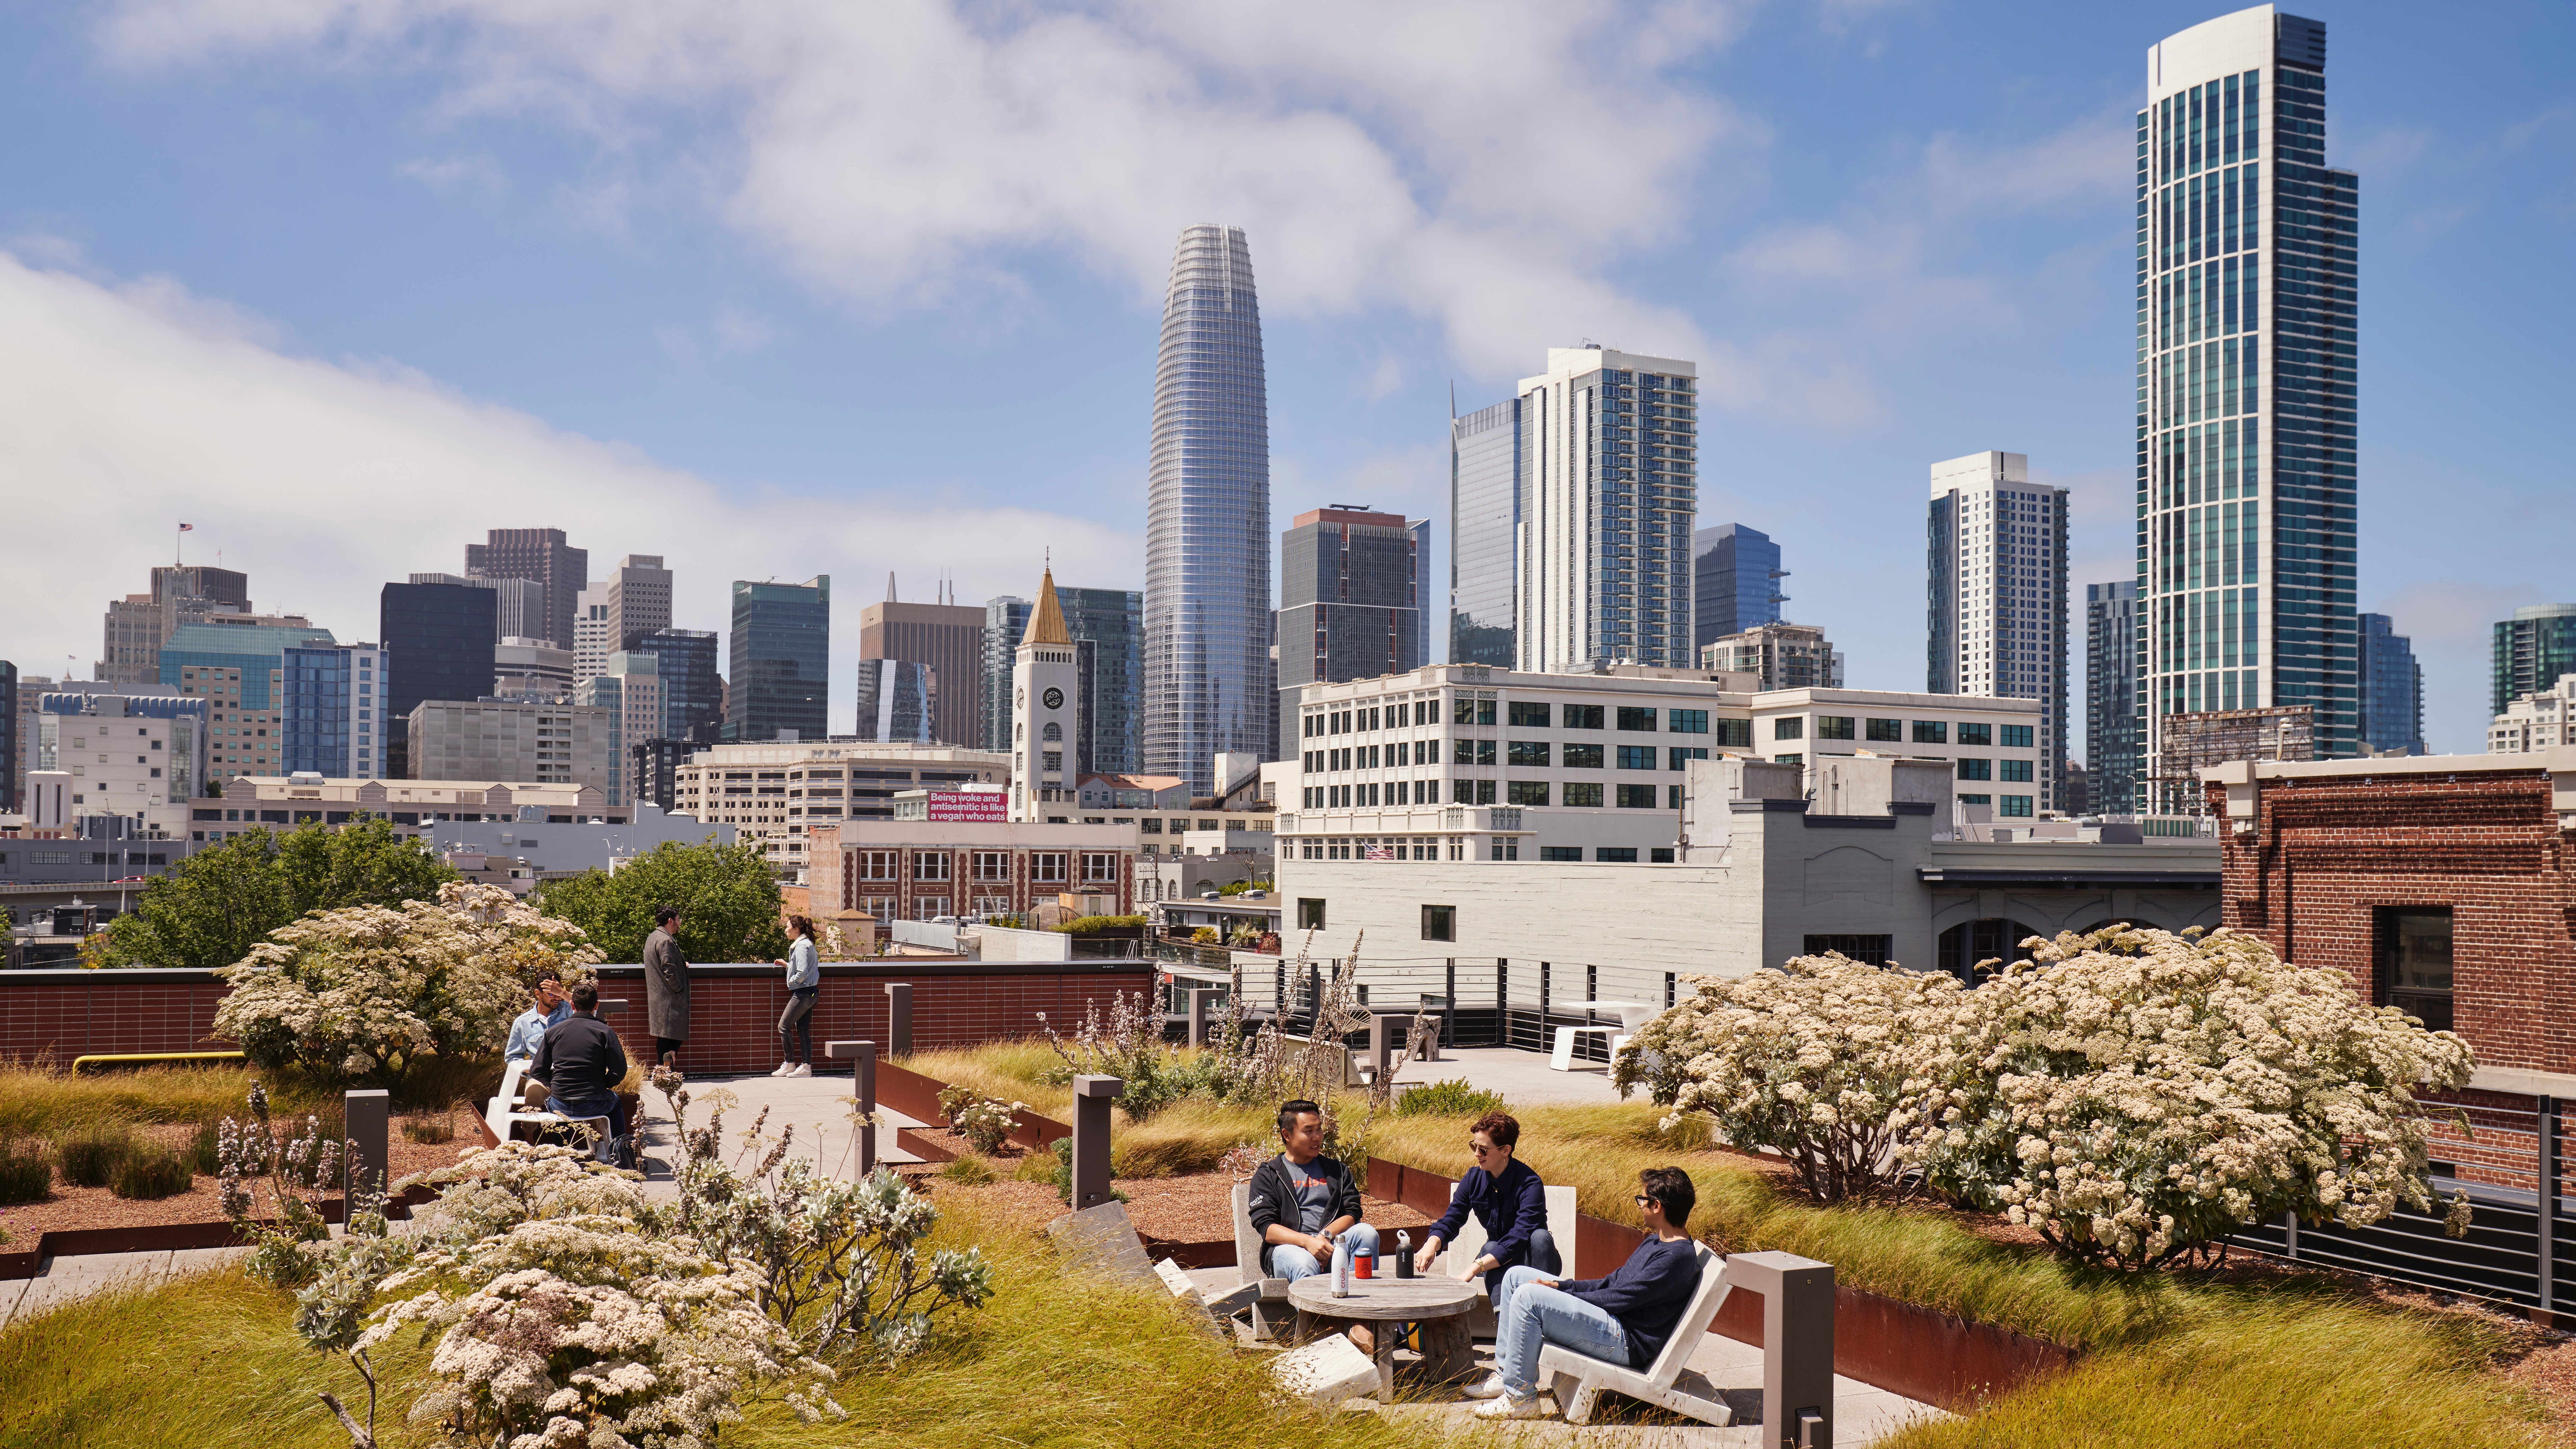 Employees enjoy the rooftop terrace at Cruise's HQ in San Francisco.